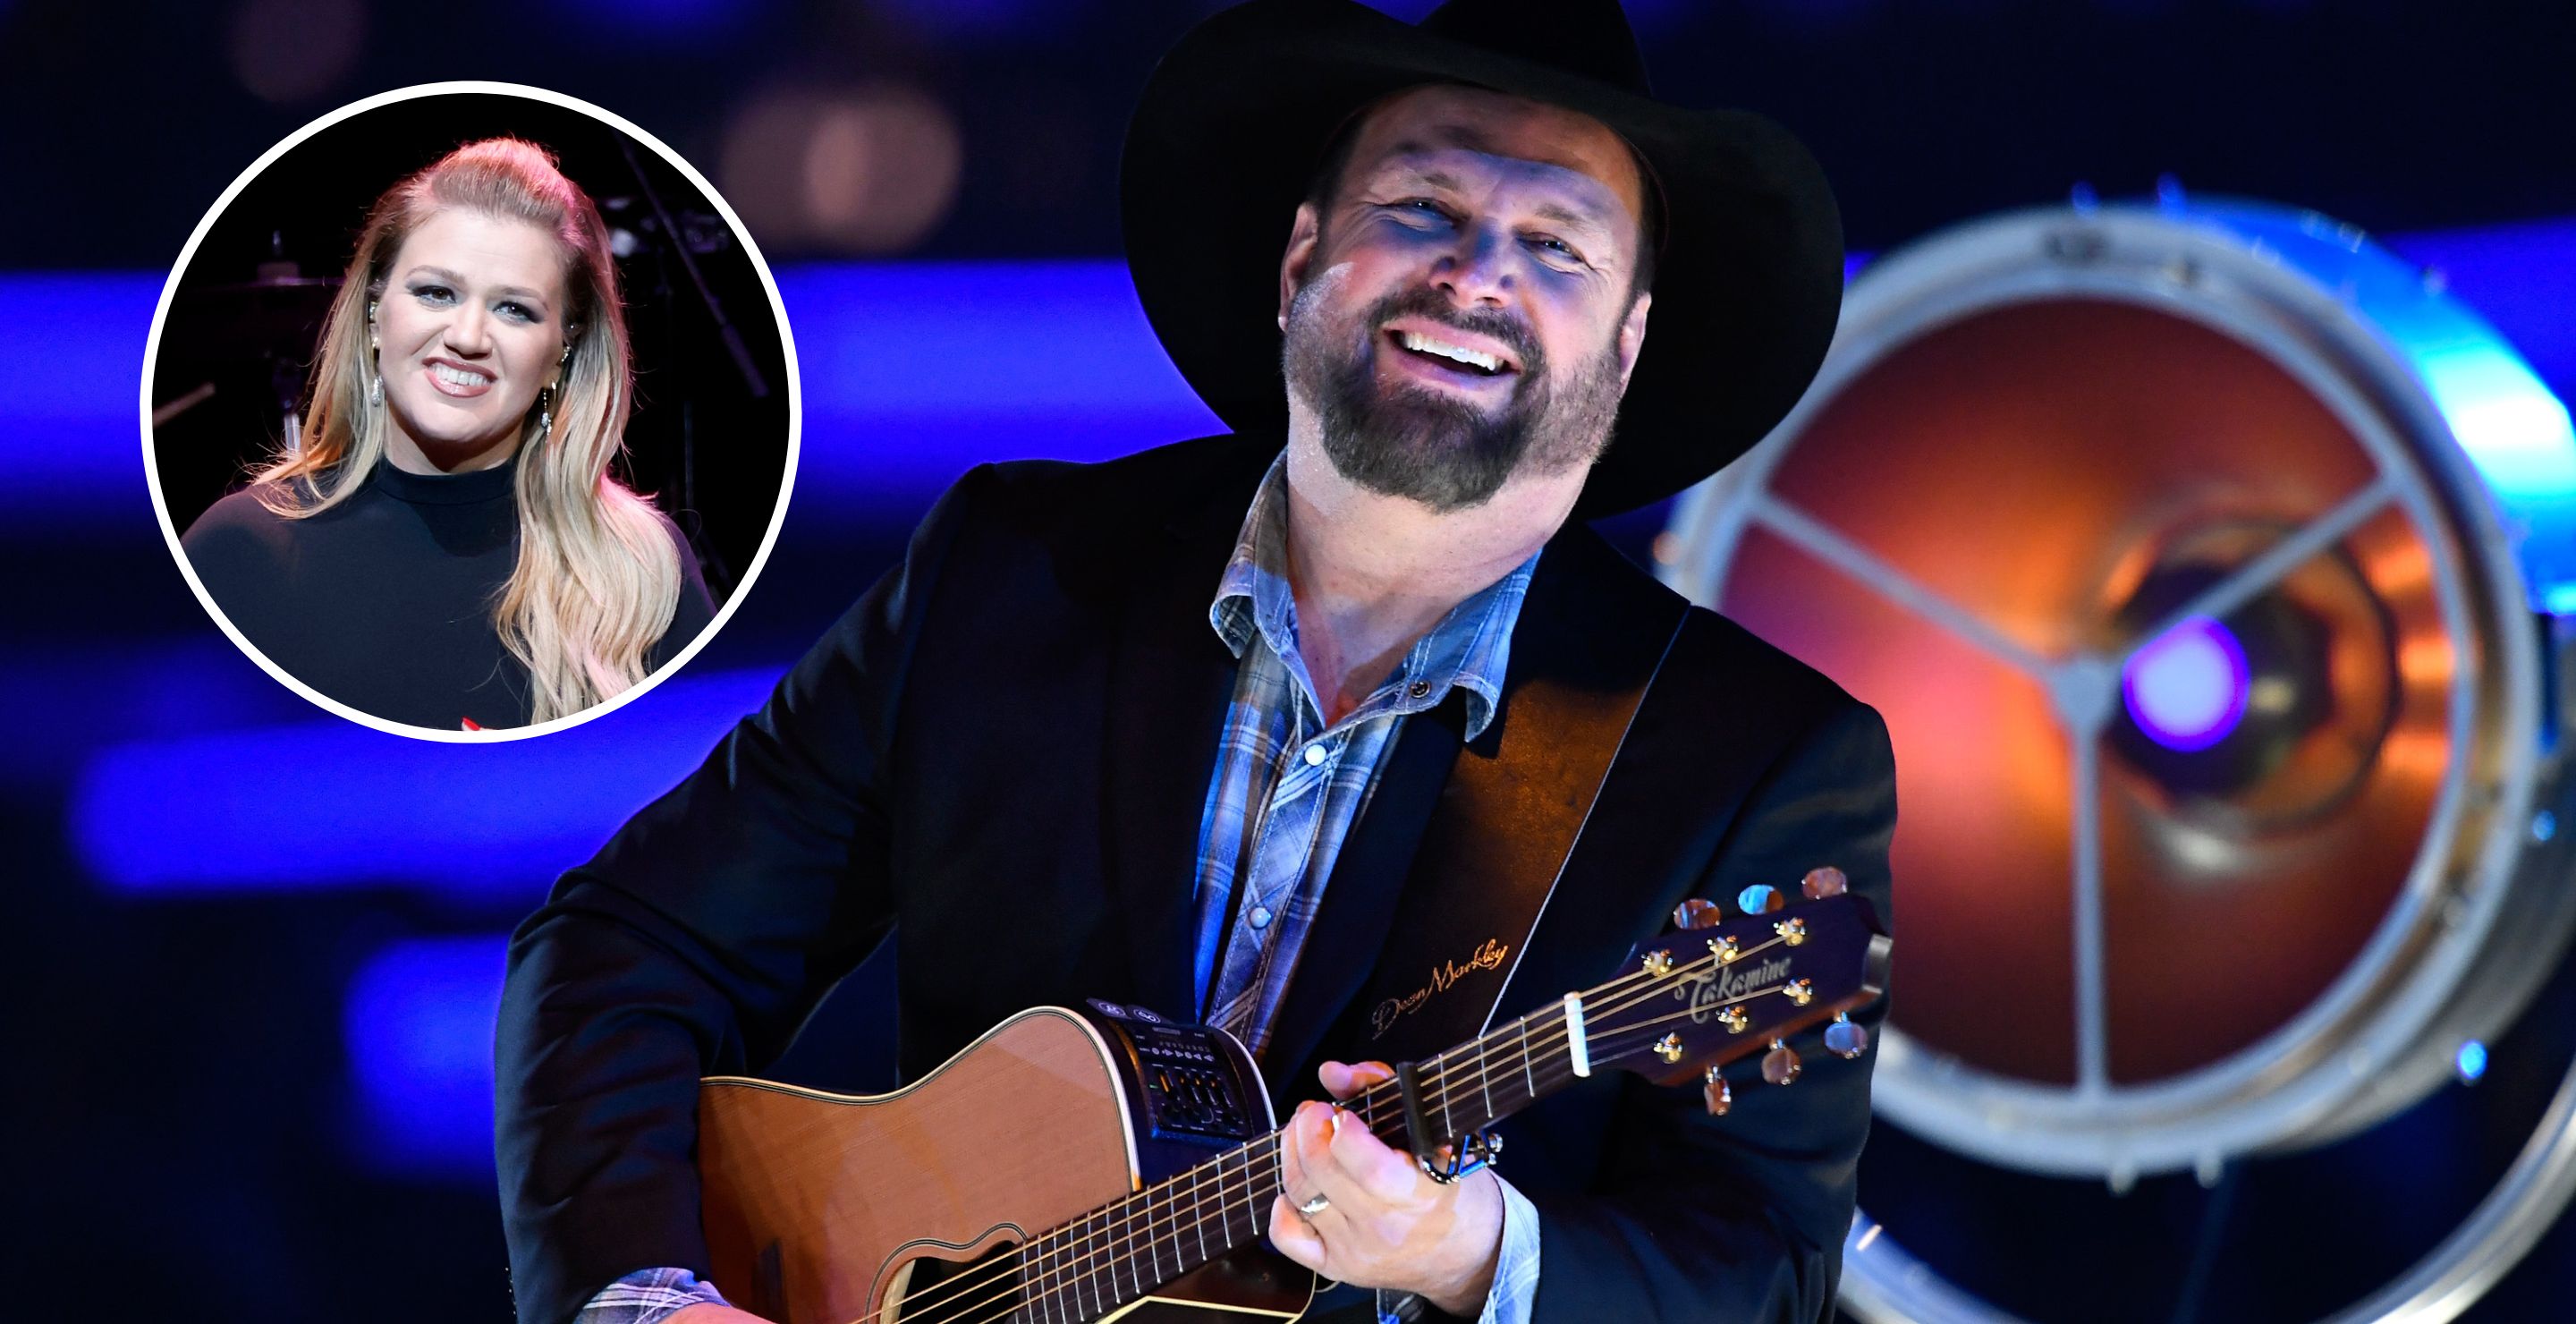 Kelly Clarkson Among the Guests on Garth Brooks' New Album